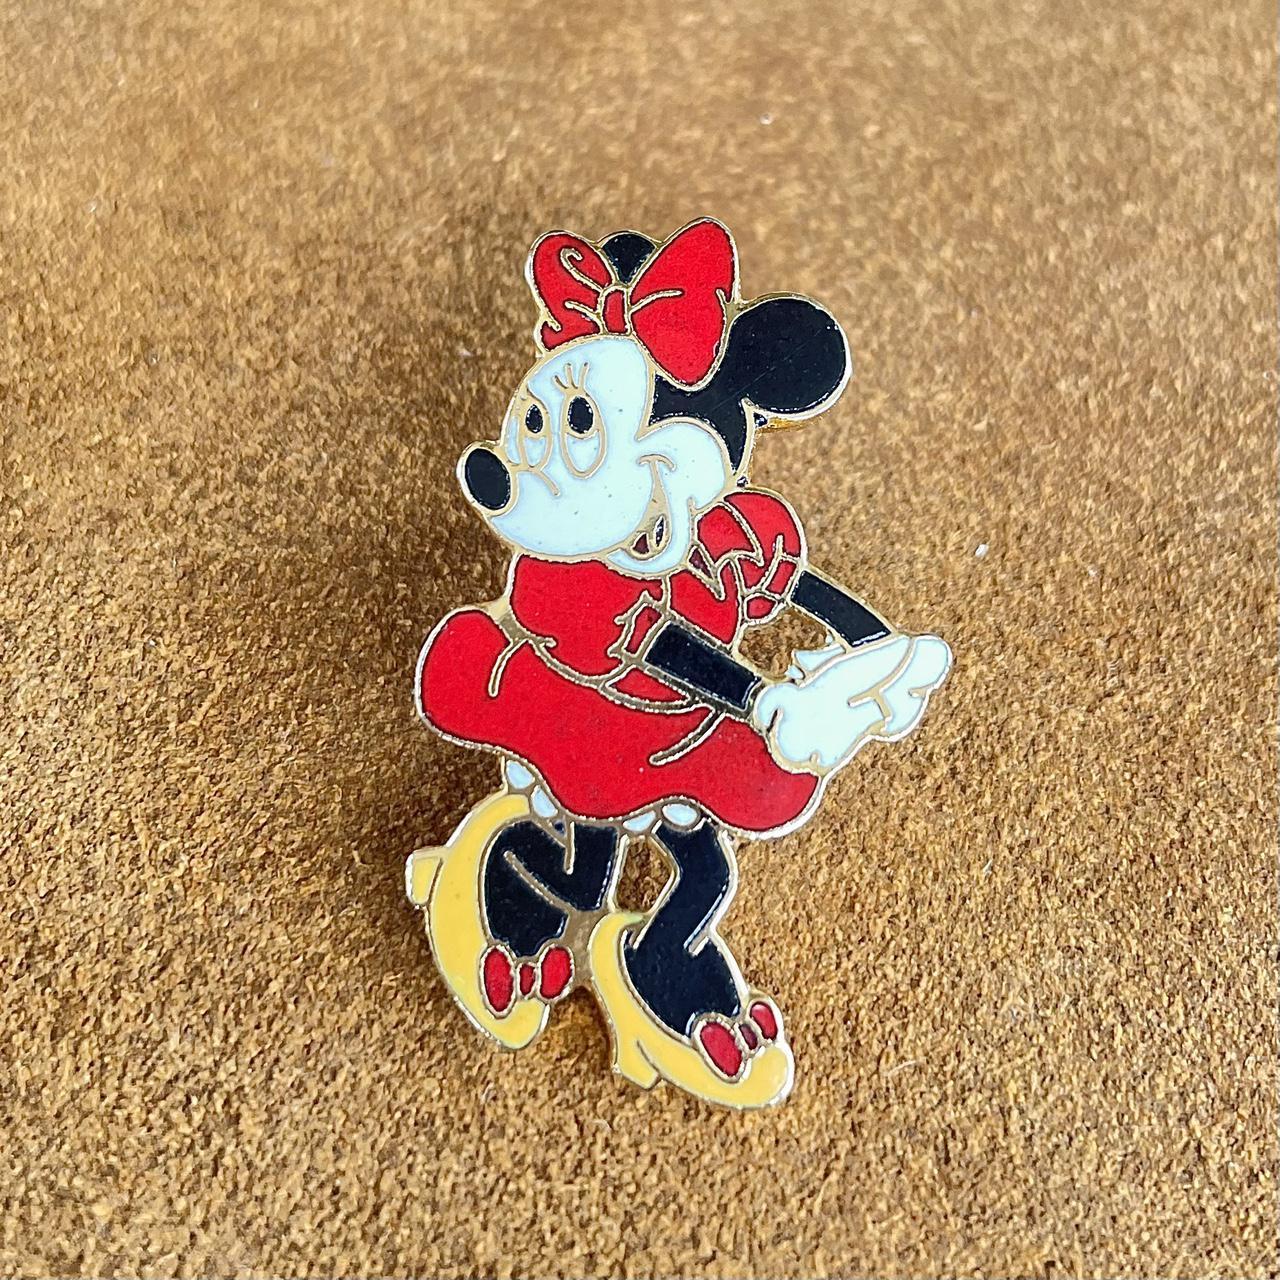 Product Image 1 - Minnie Mouse Pin
💌 free shipping